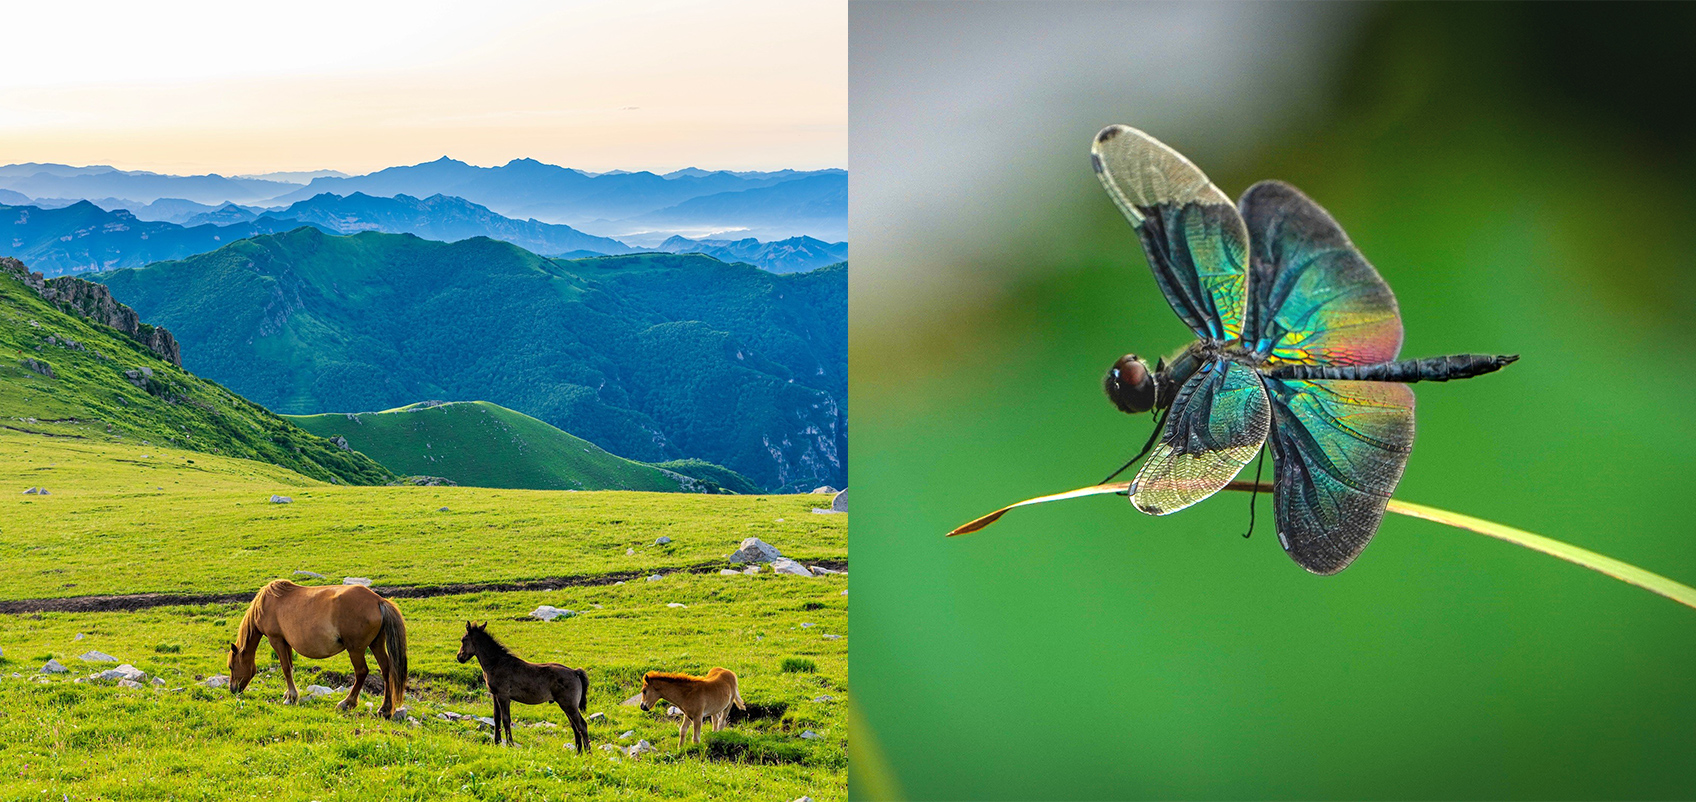 "(Left) A photo of a family horses grazing in a mountain meadow
(Right) A photo of colorful insect perching on a grass."